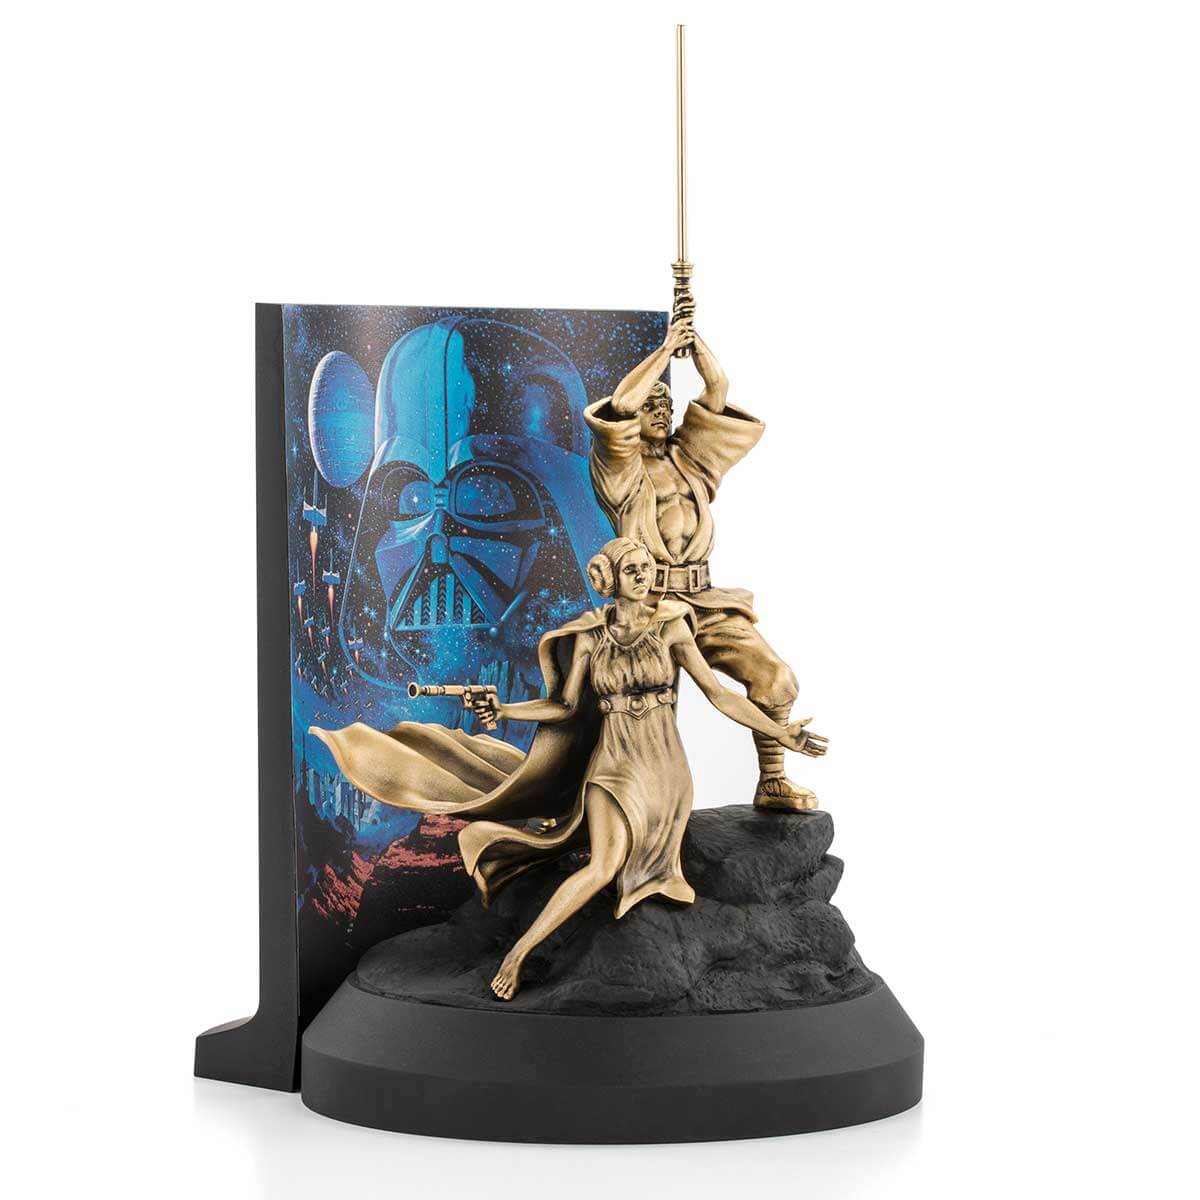  Royal Selangor Limited Edition Pewter Yoda Bust (Gilt) -  Licensed Star Wars Statue/Collectible/Figurine : Home & Kitchen